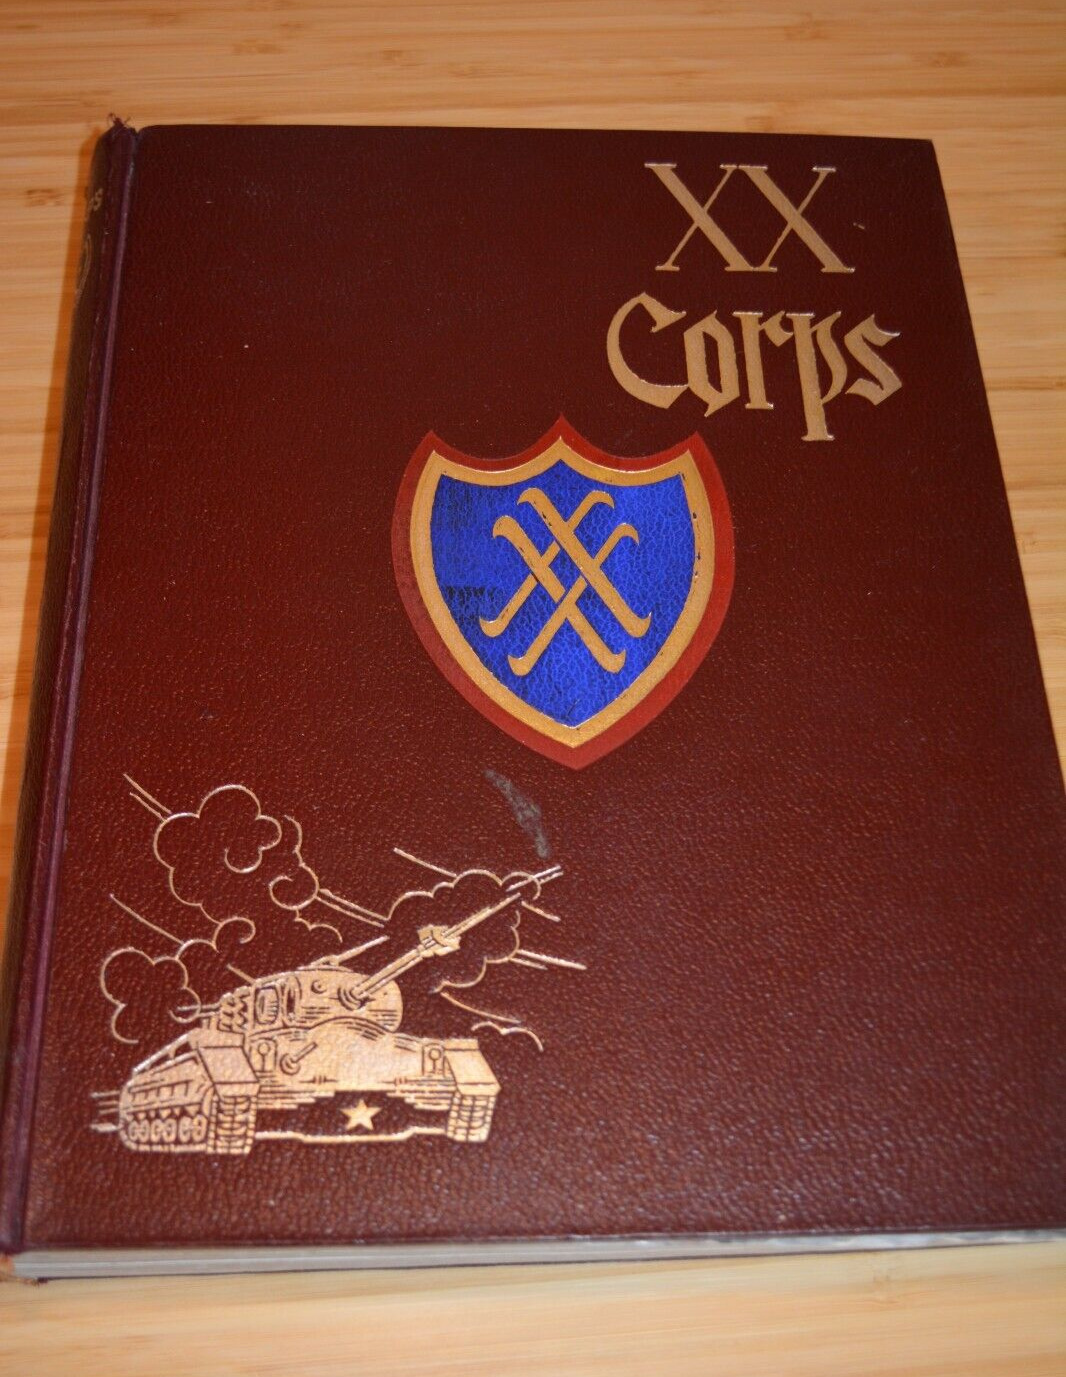 The XX Corps Its History and Service in World War II XX Corps Personnel Army